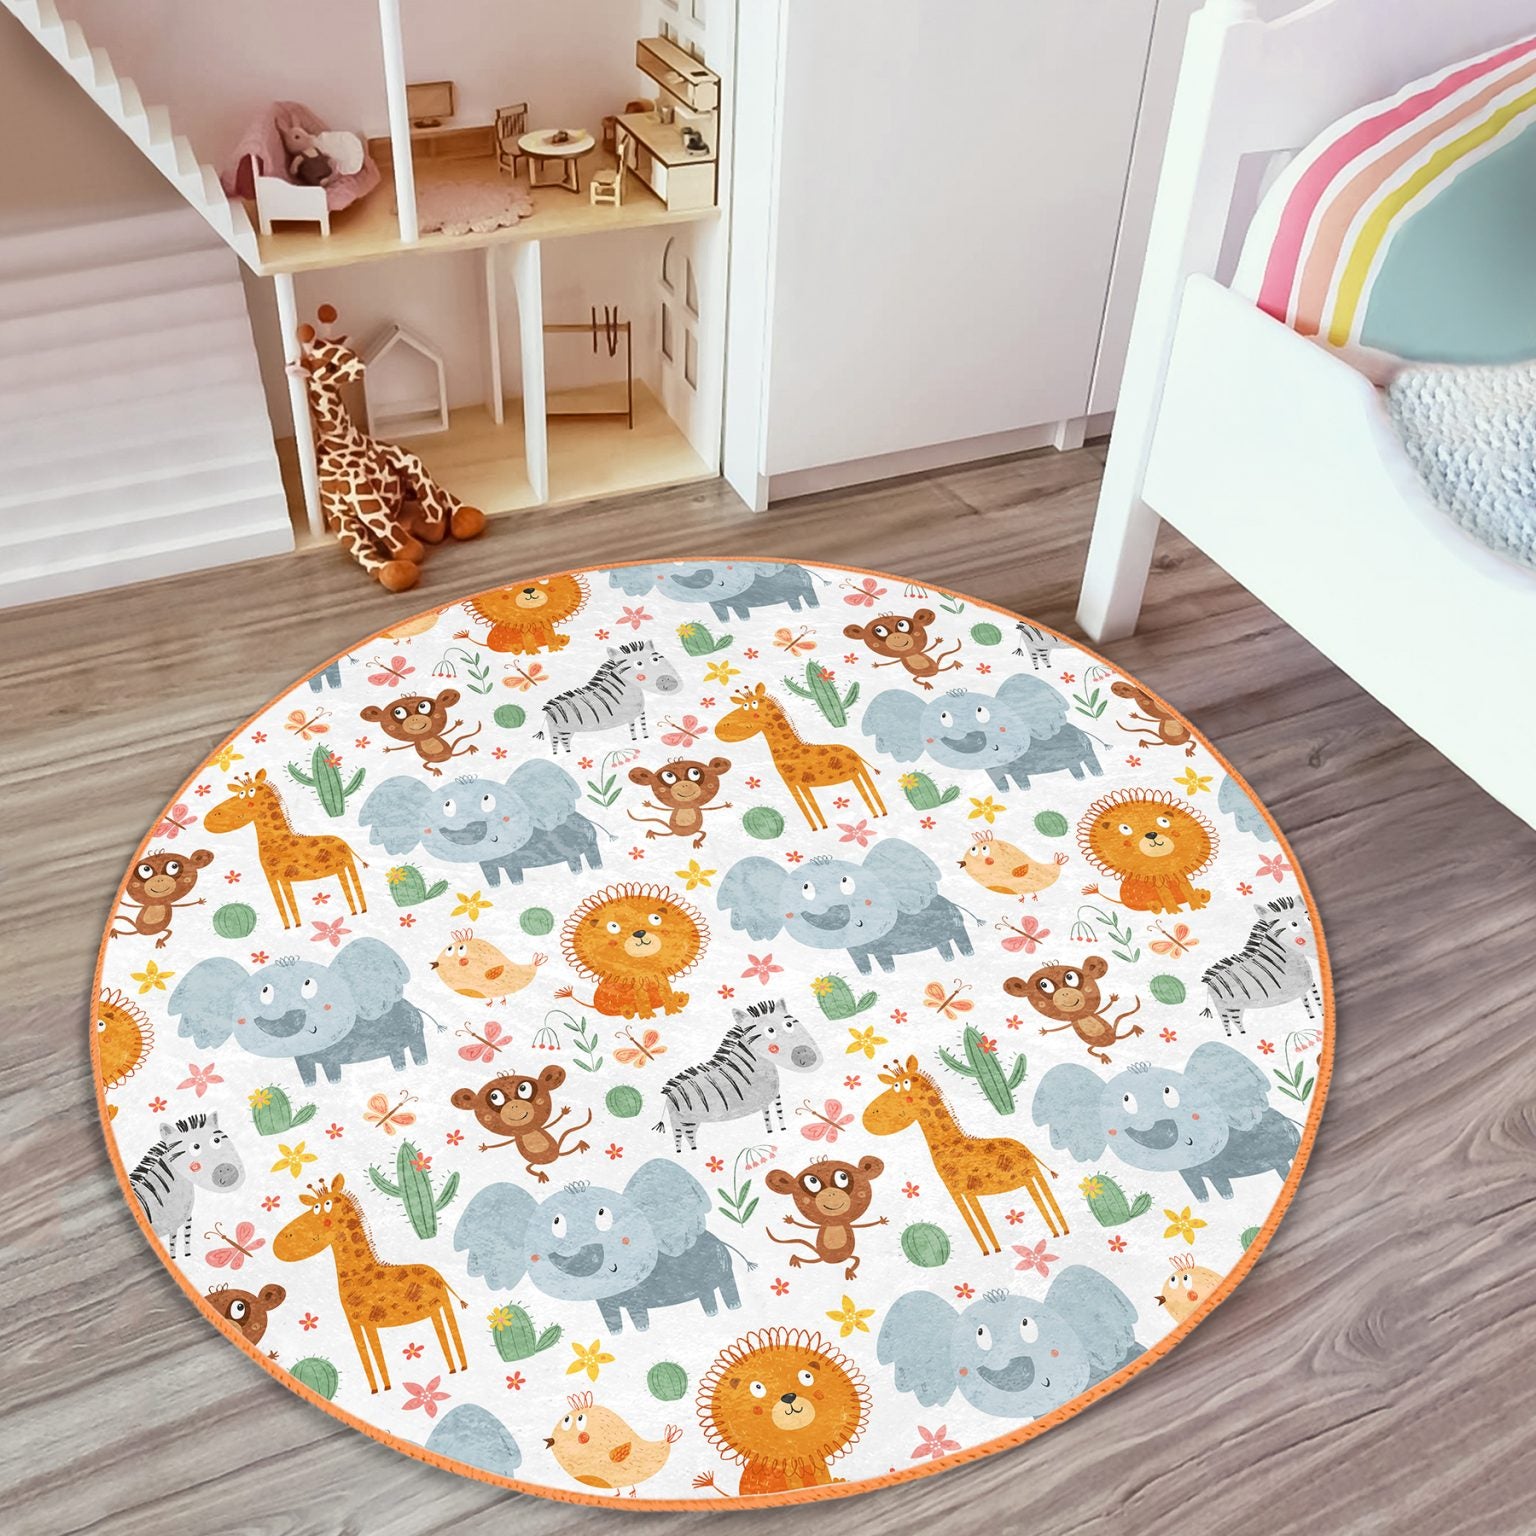 Playful Kids Rug Featuring Adorable Animals